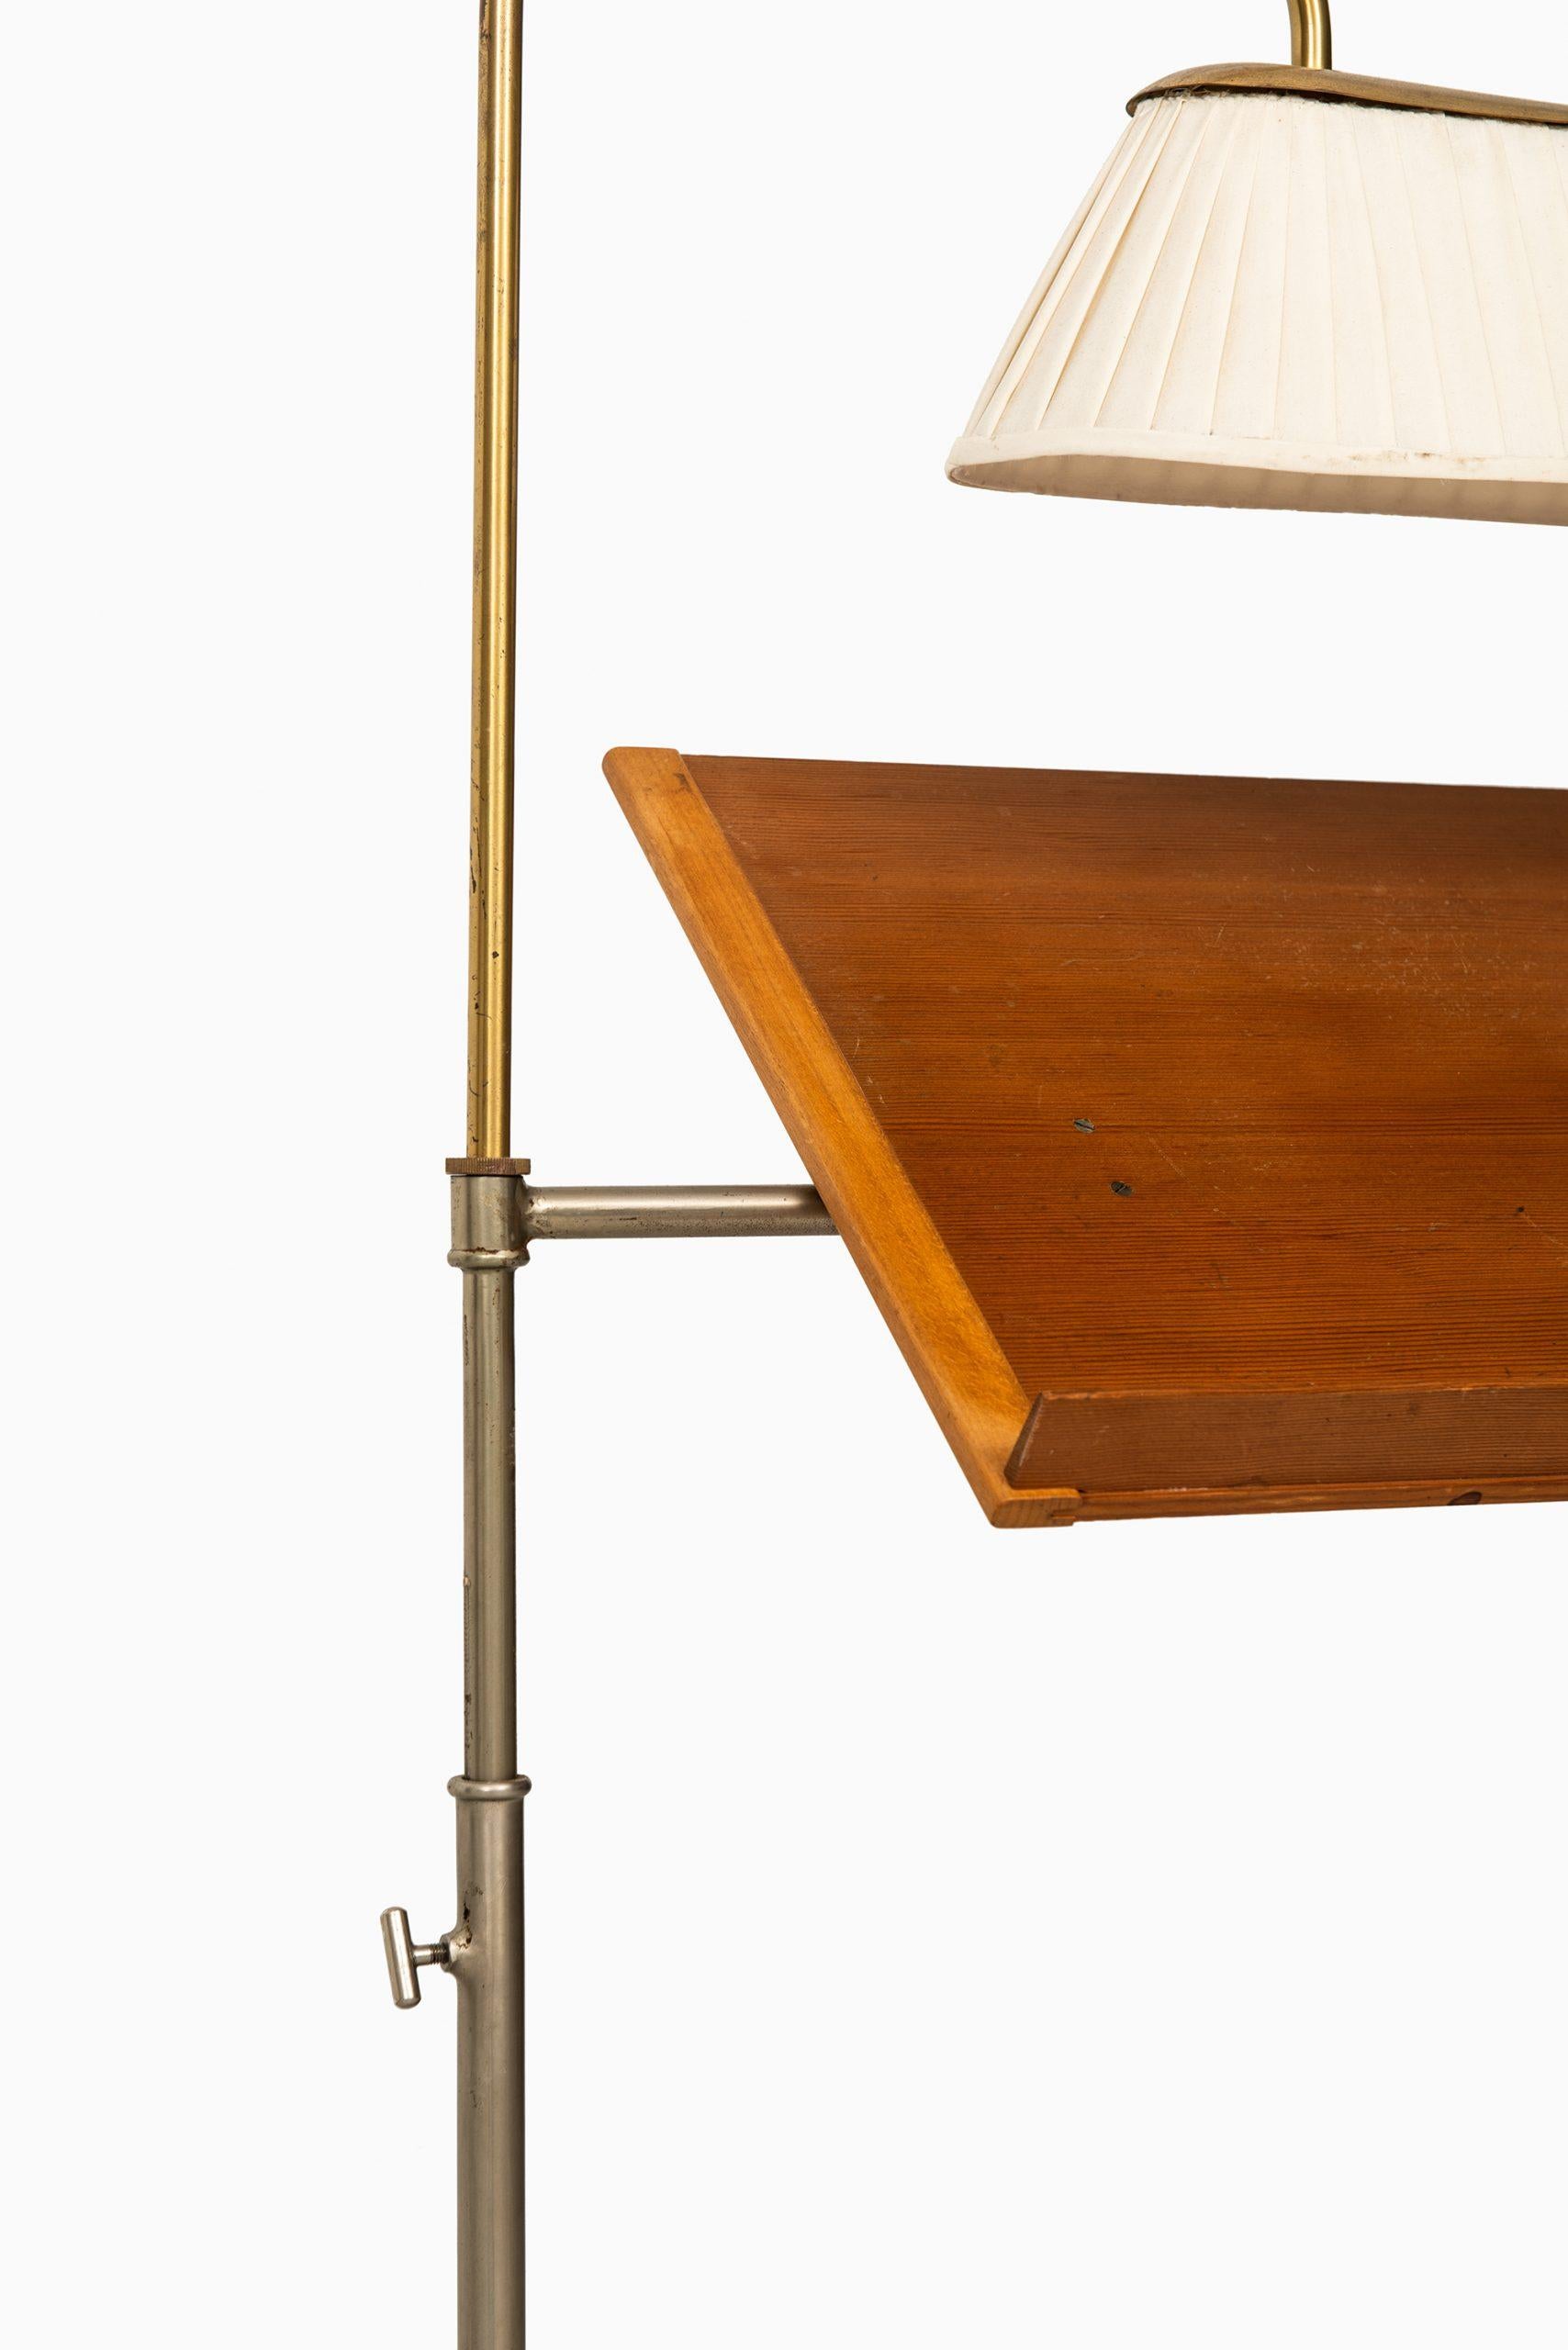 Very rare reading stand with light designed by Bruno Mathsson. Produced by Karl Mathsson in Värnamo, Sweden.
   